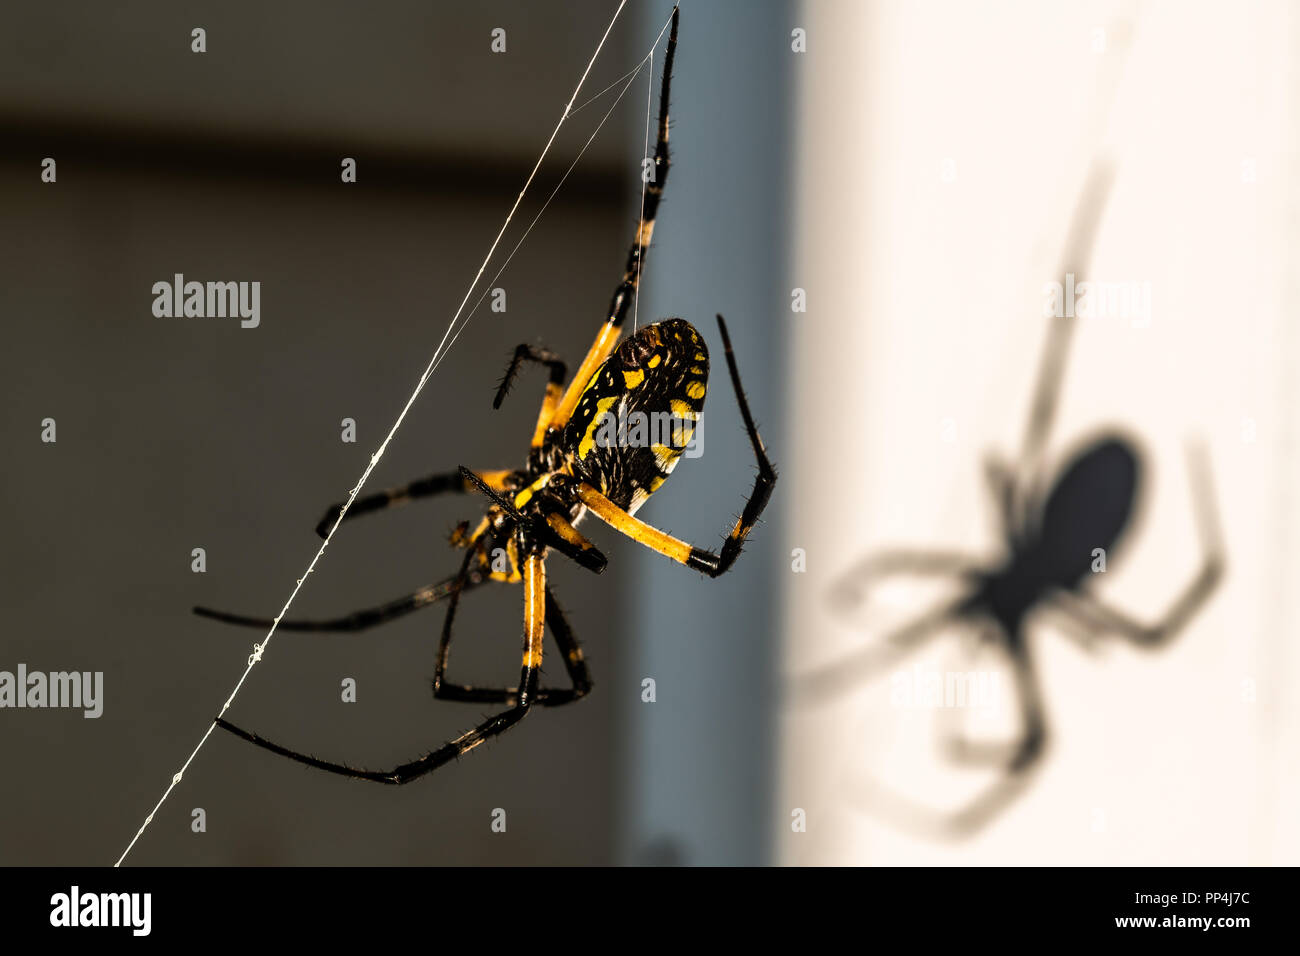 A black and yellow orbweaver spider sits on a web in the sun, casting a shadow Stock Photo